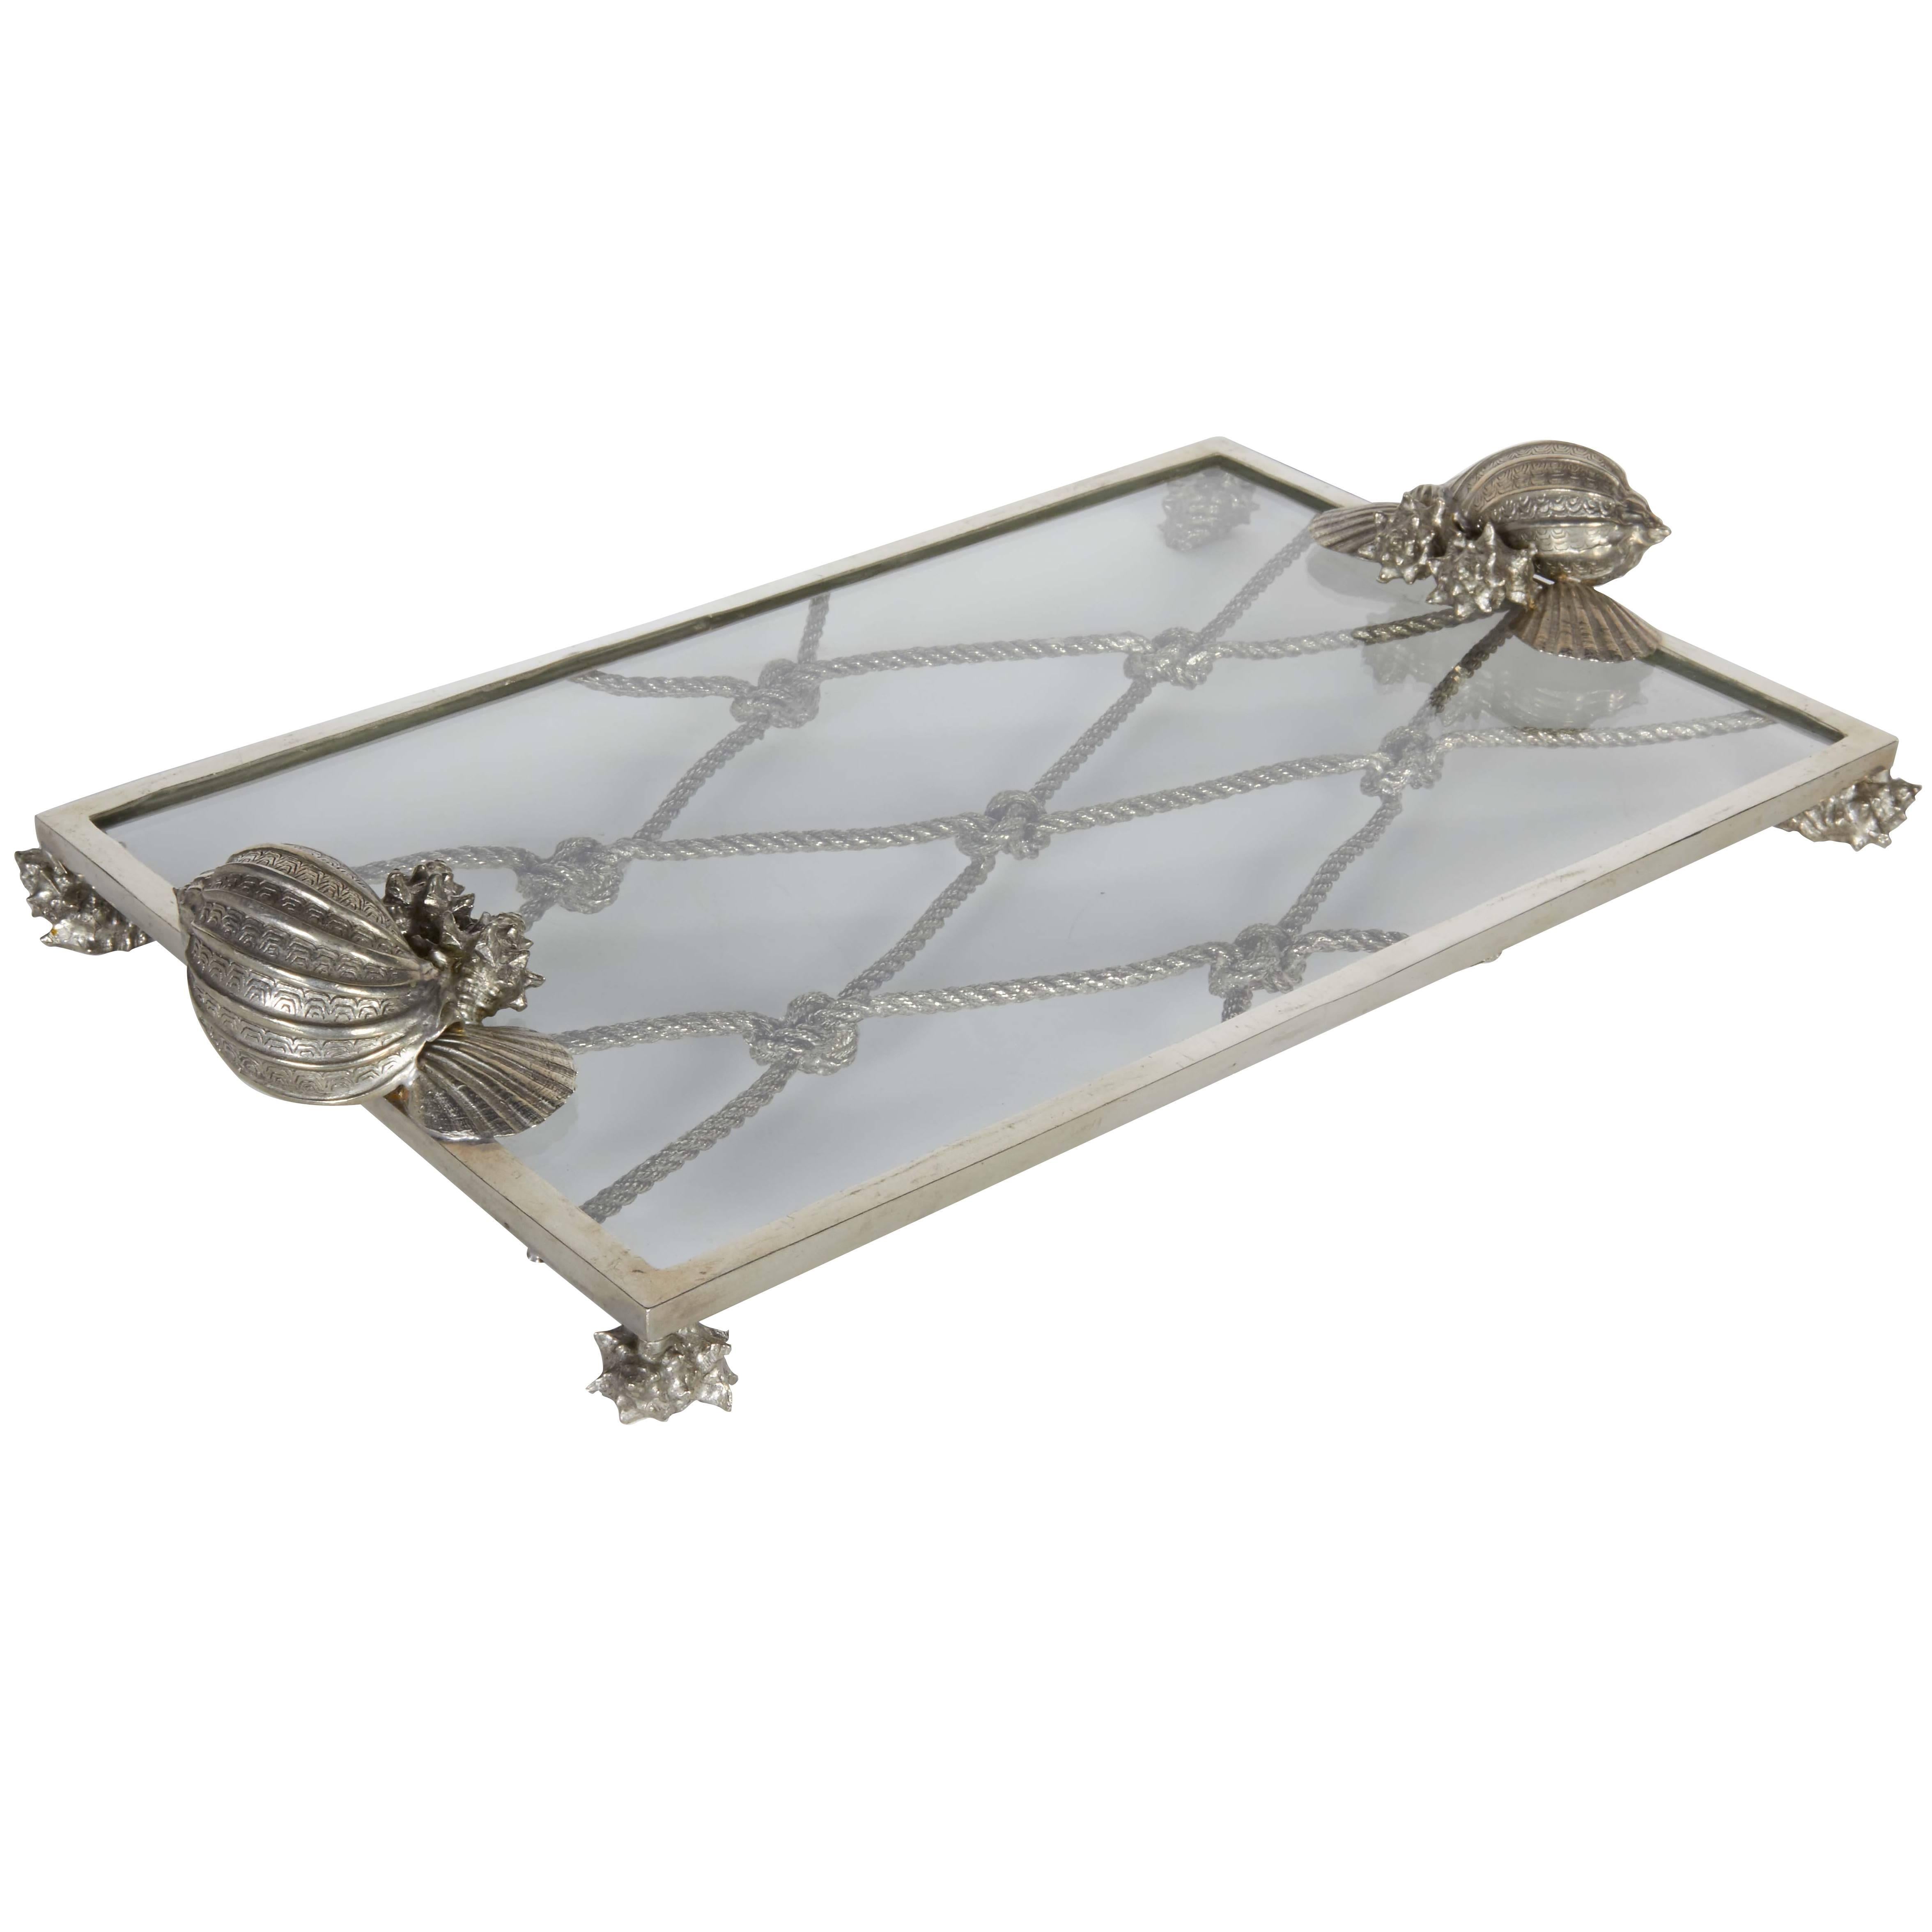 Exquisite pewter and glass serving tray with nautical theme.  All handcrafted pewter frame with glass top, featuring sea shell and knotted rope motifs.  Great addition to any barware set. 